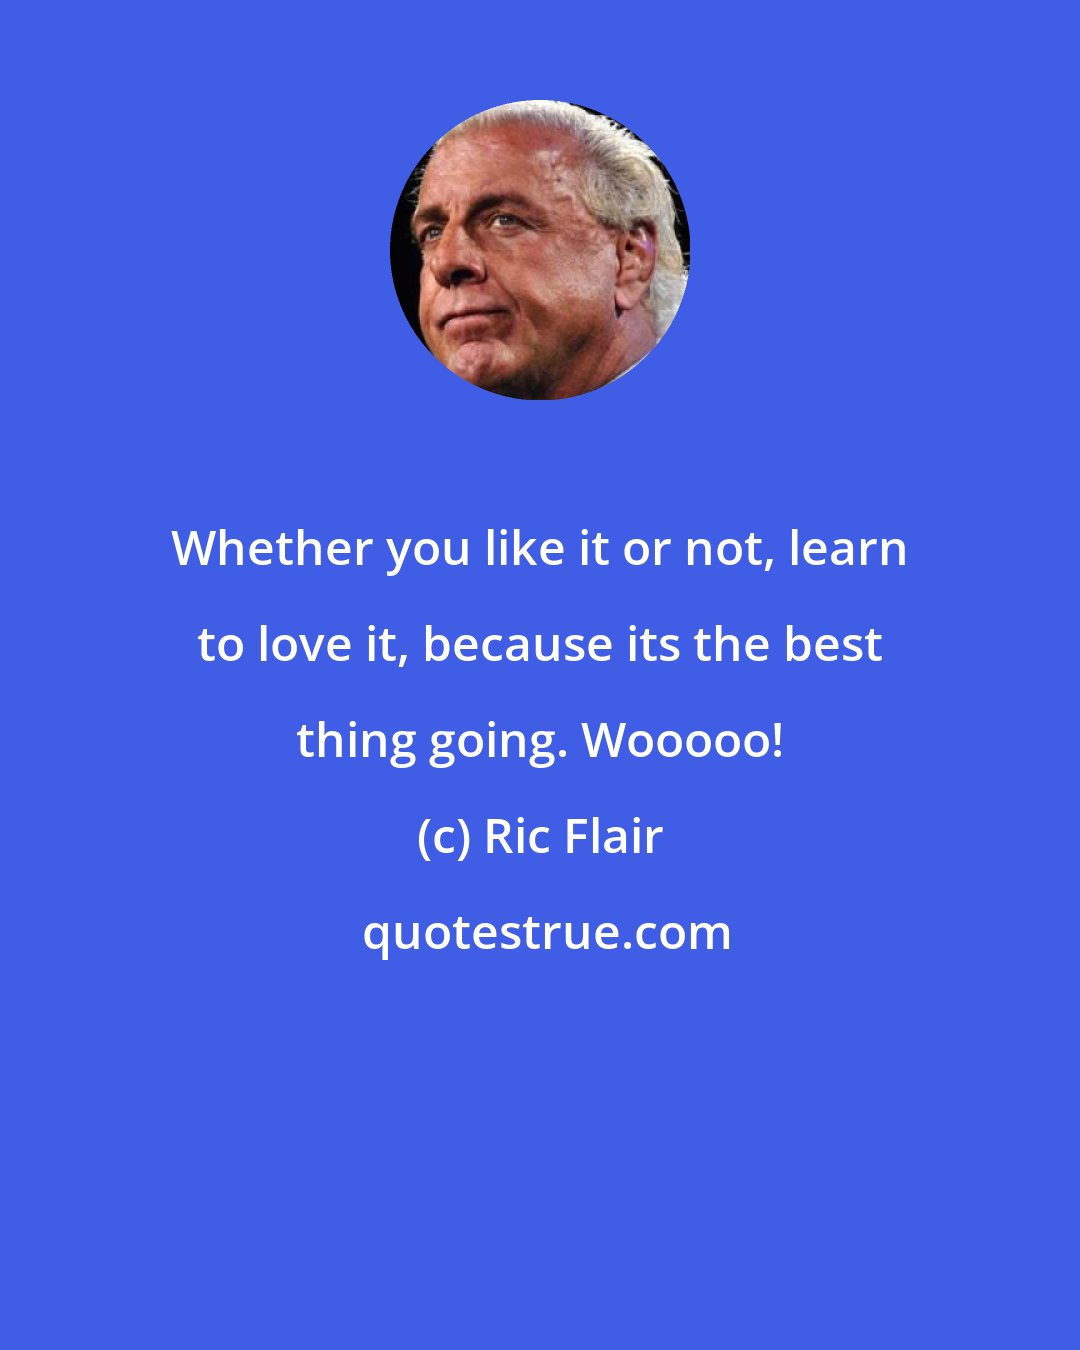 Ric Flair: Whether you like it or not, learn to love it, because its the best thing going. Wooooo!